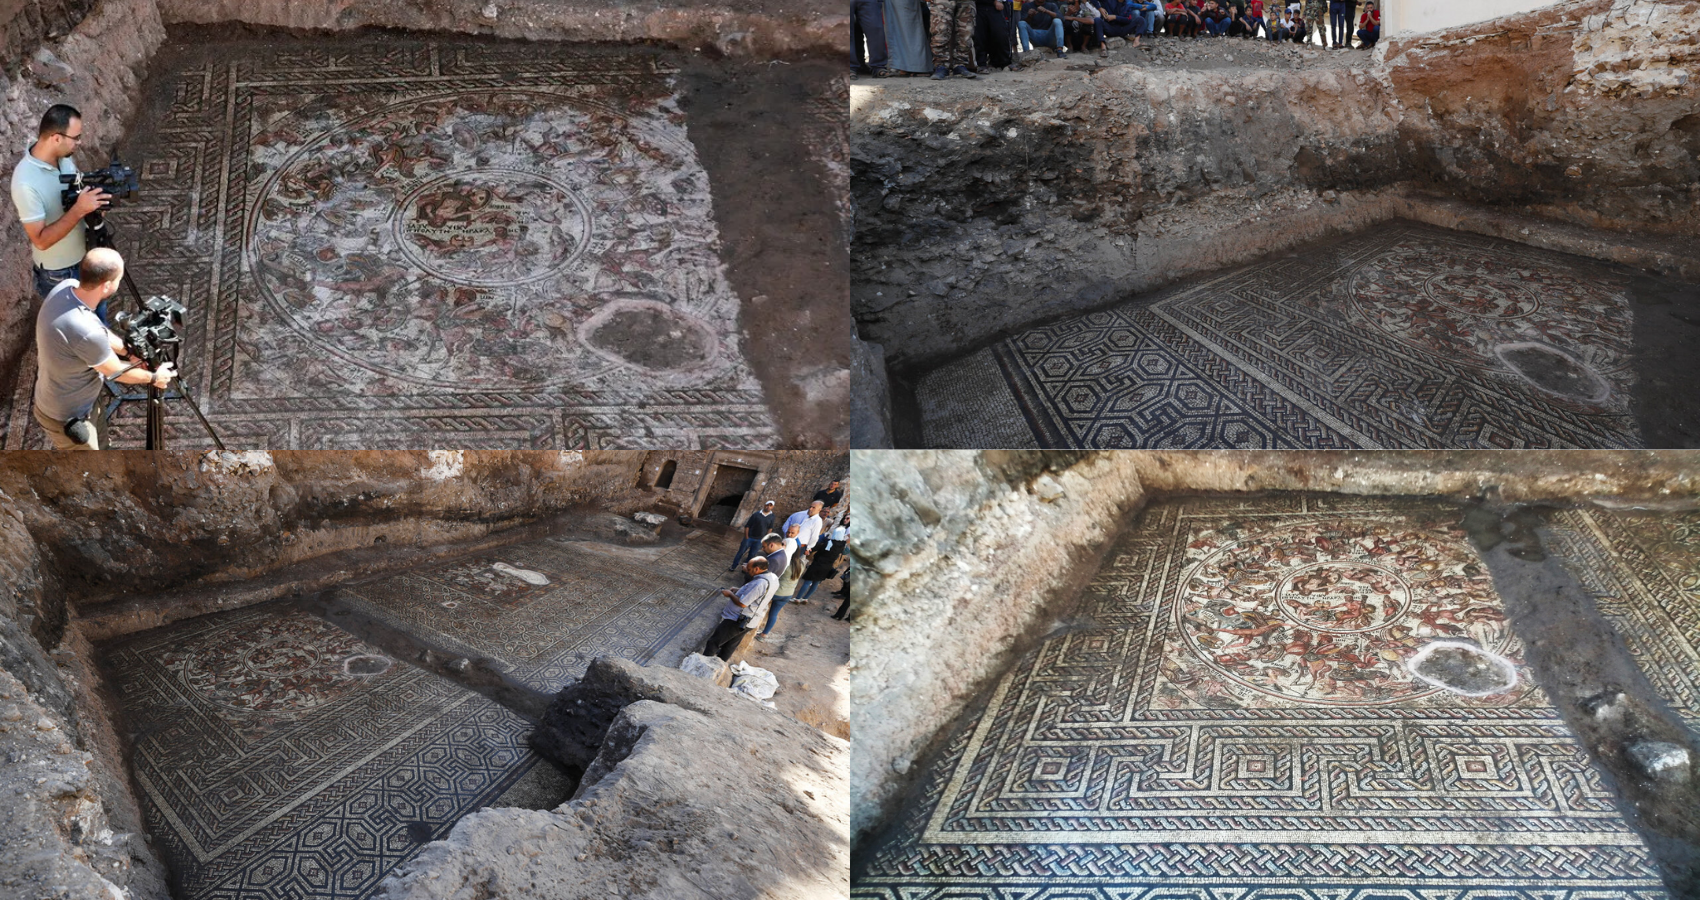 Syria digs up ‘rare’ Roman mosaic in former rebel stronghold